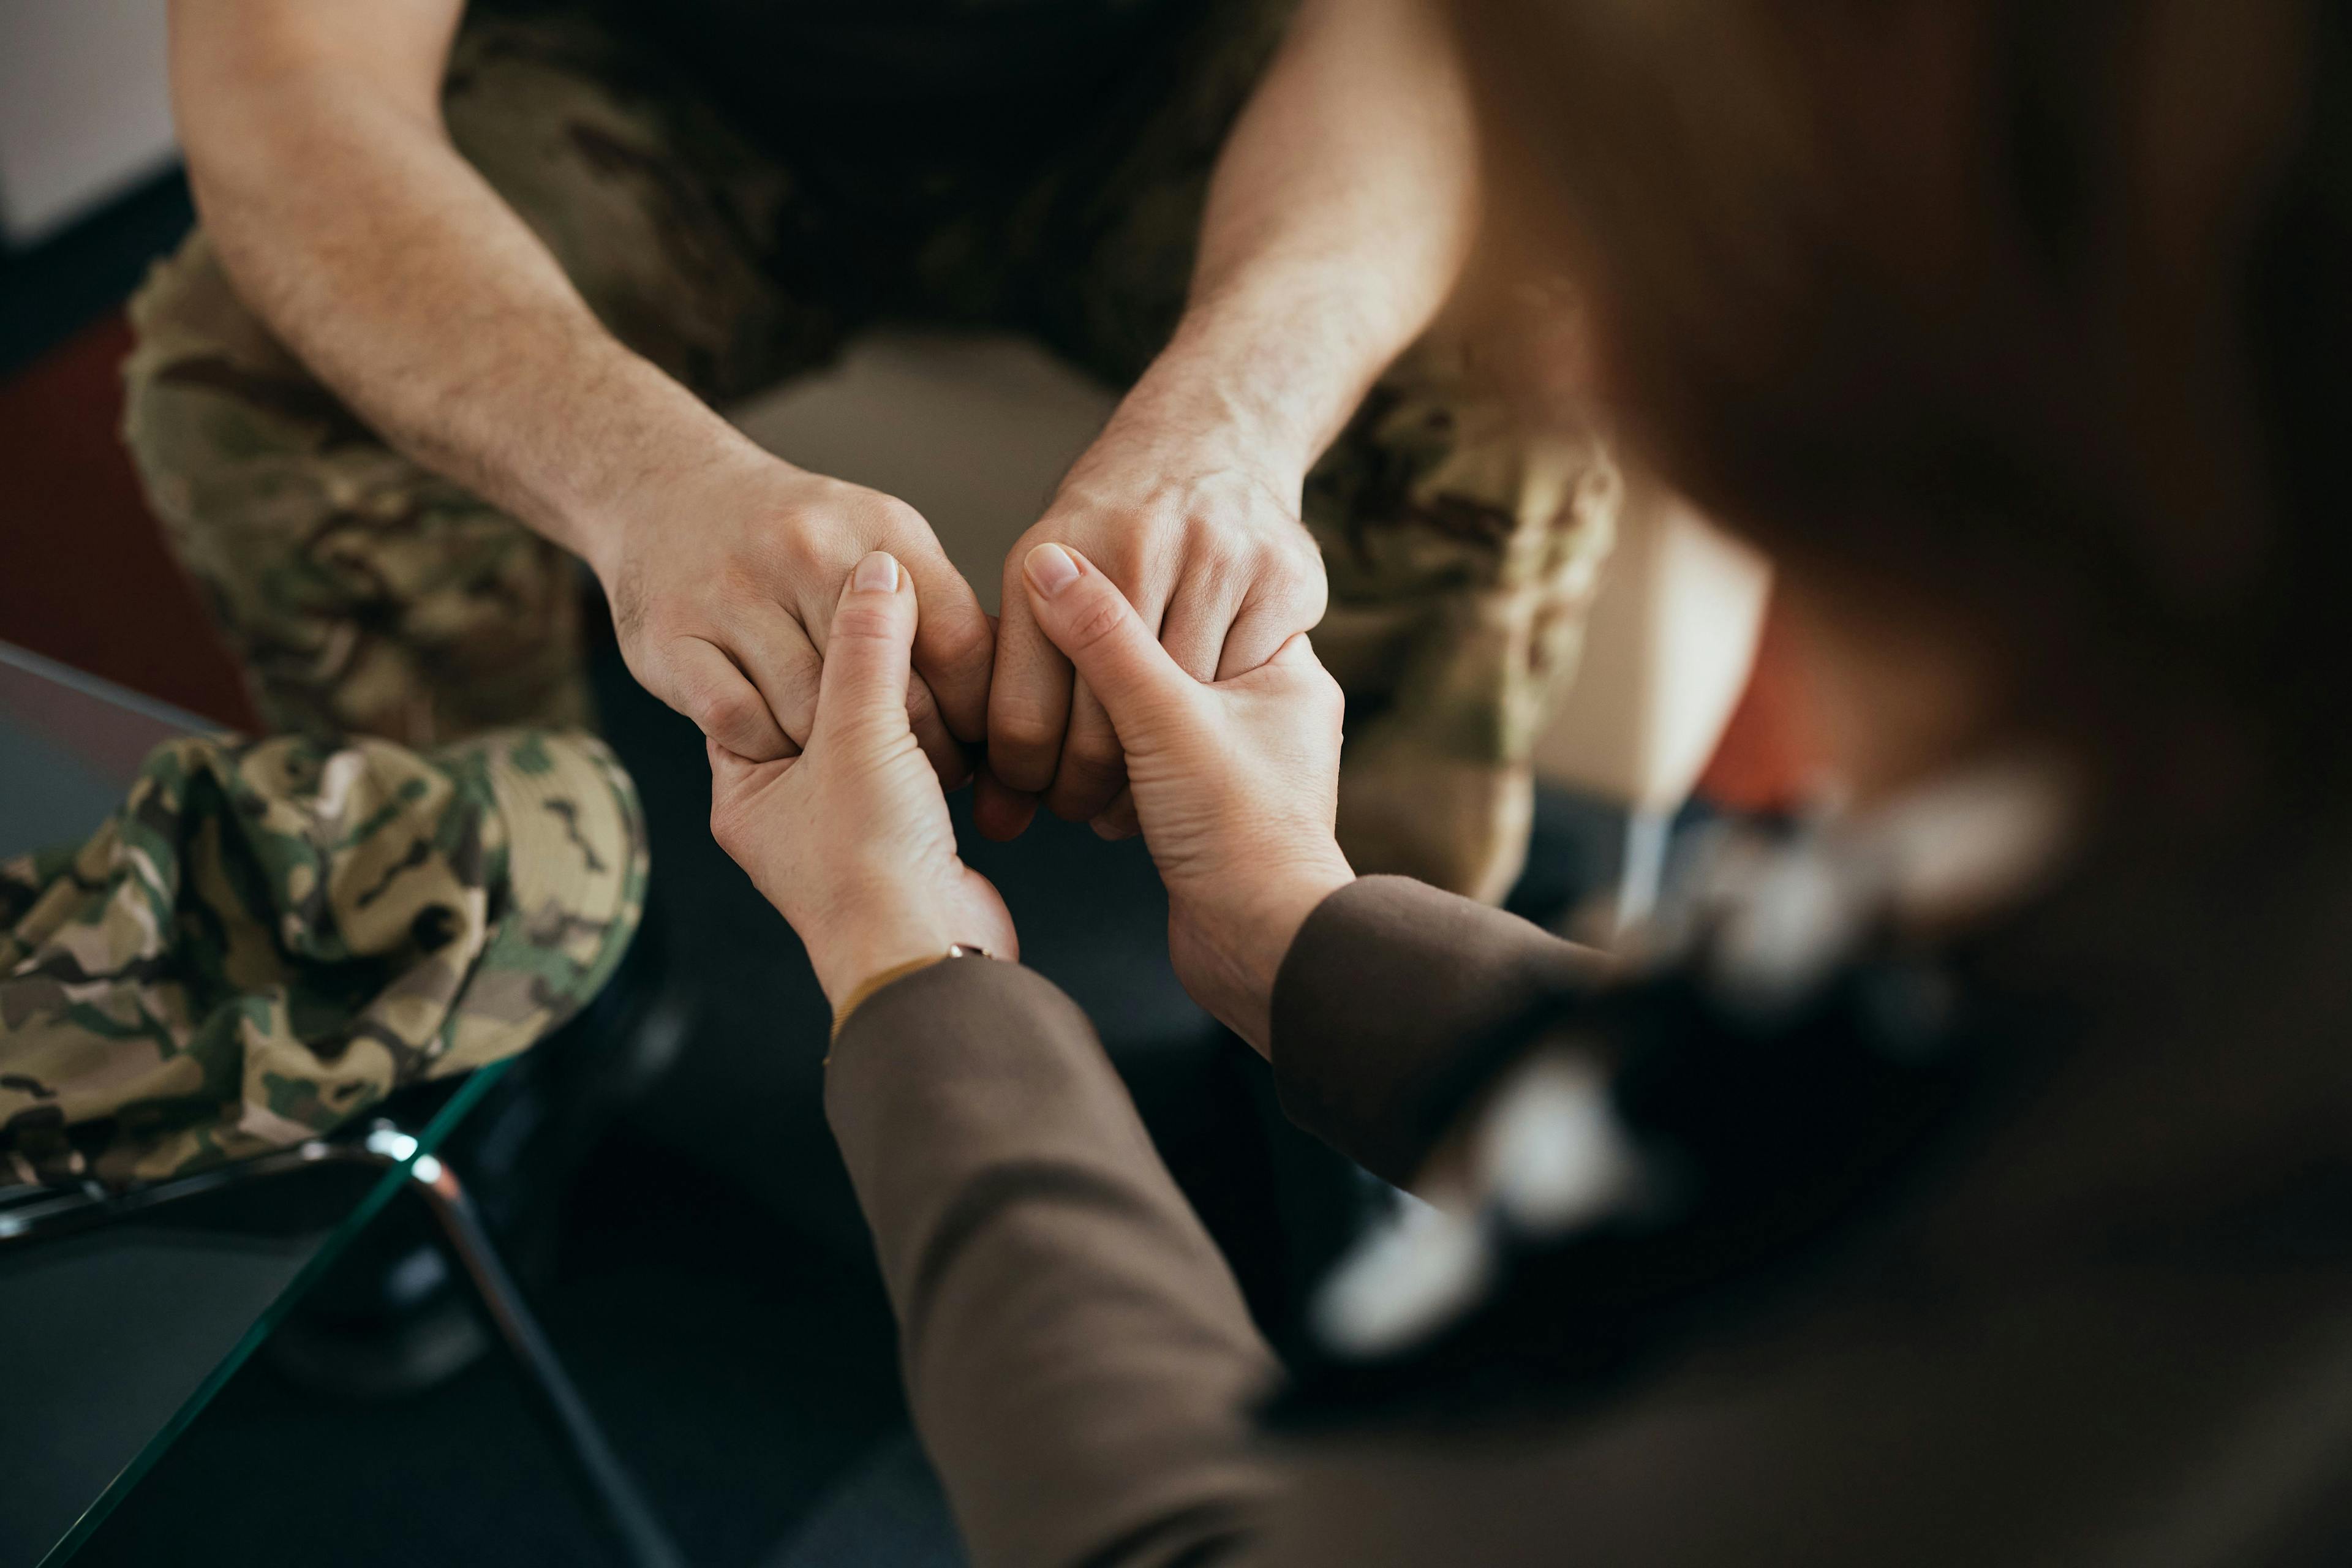 Close up of psychotherapist holding hands with soldier during counseling at her office - Image credit: Drazen | stock.adobe.com